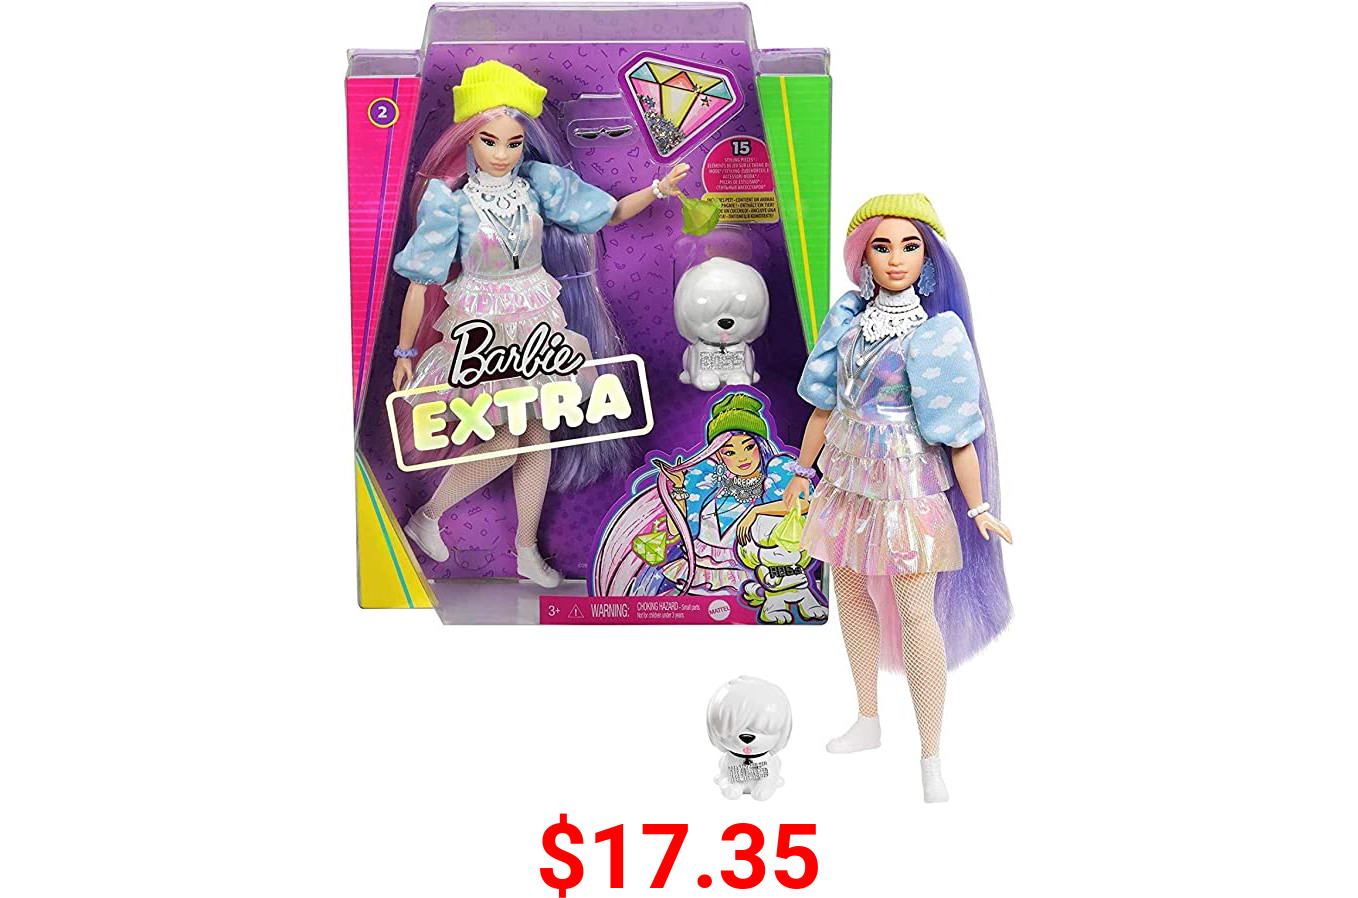 Barbie Extra Doll #2 in Shimmery Look with Pet Puppy, Pink & Purple Fantasy Hair, Layered Outfit & Accessories Including Neon Beanie, Multiple Flexible Joints, Gift for Kids 3 Years Old & Up